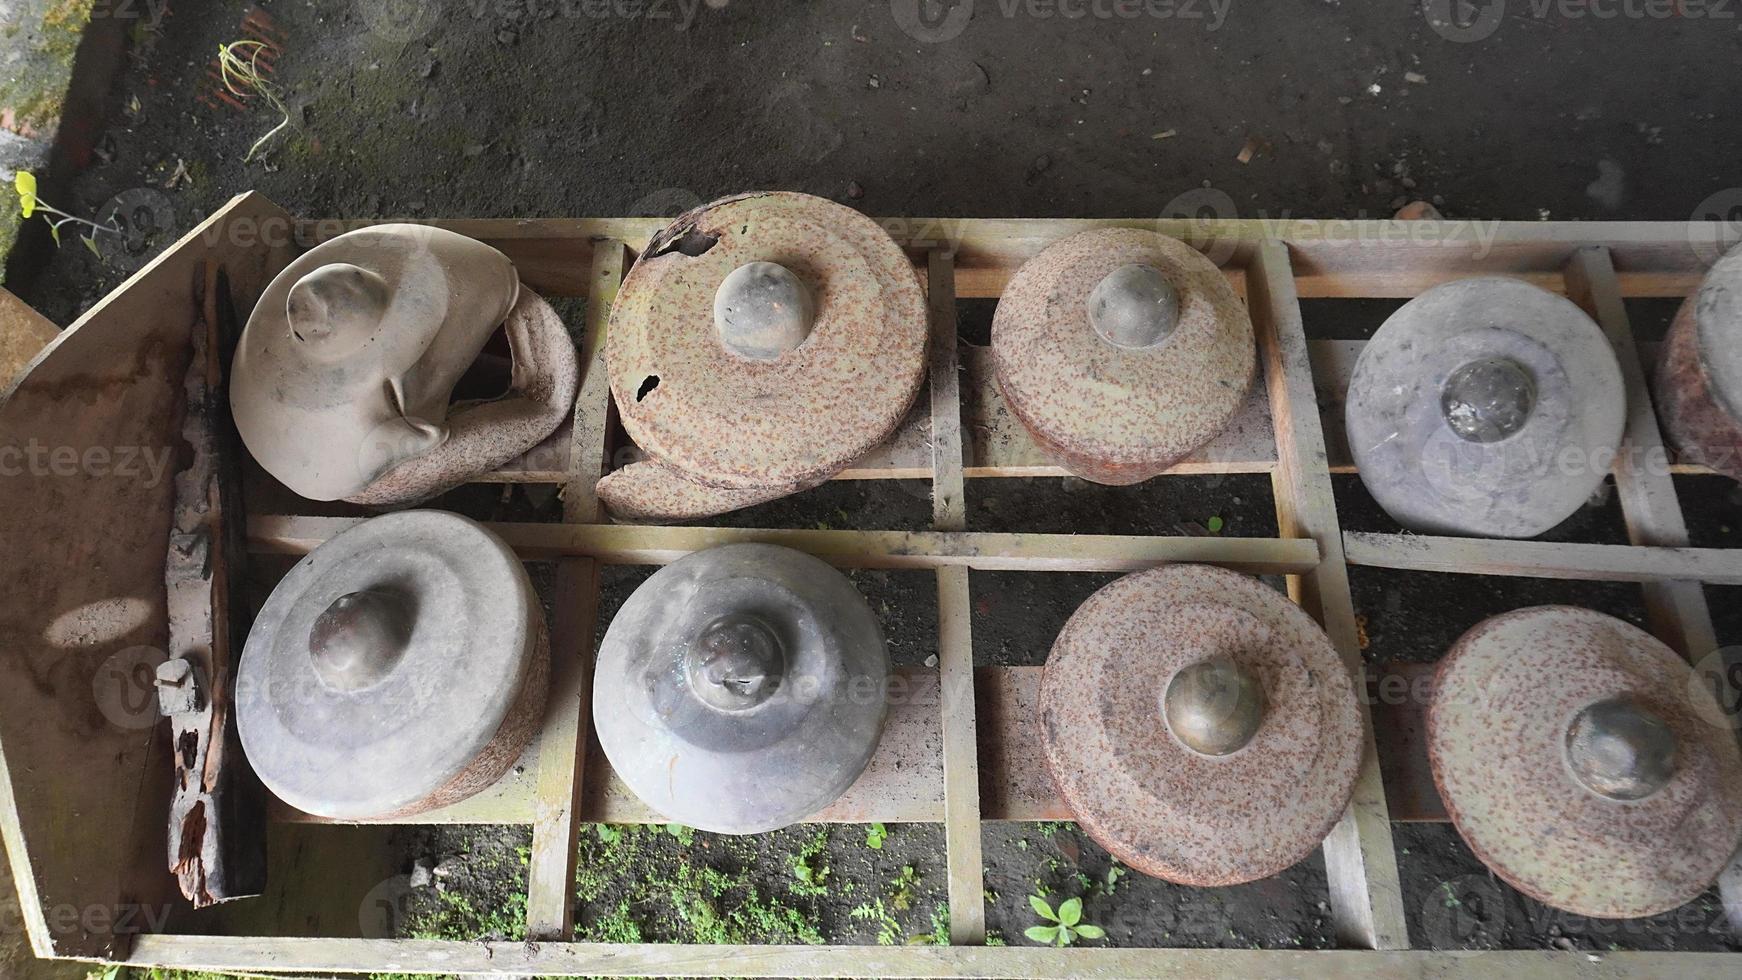 Gamelan musical instruments were found in residential areas on the slopes of Mount Merapi photo